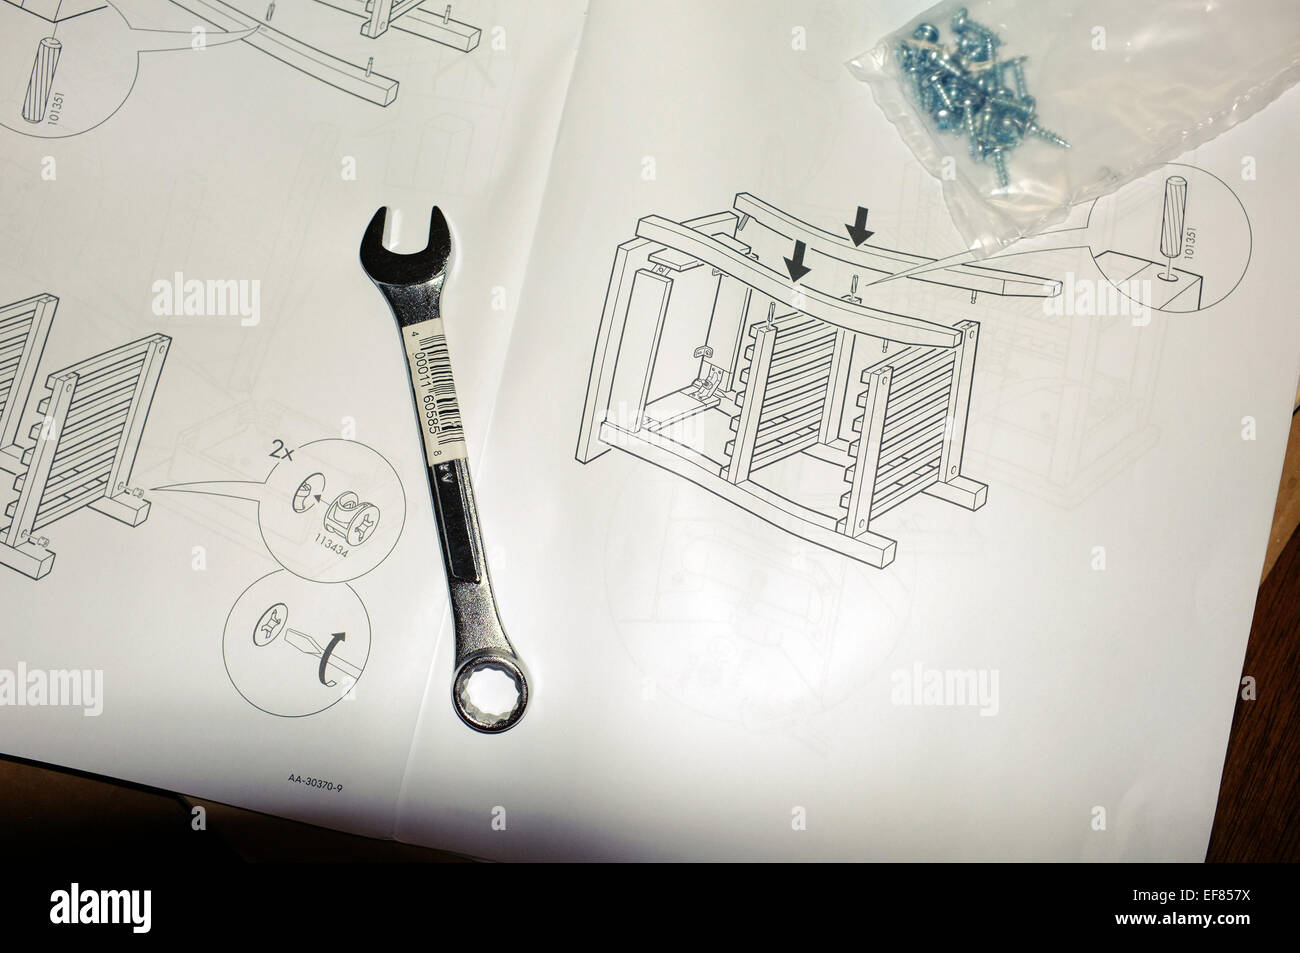 Ikea Furniture Assembly Instructions With A Spanner On Top Of Them